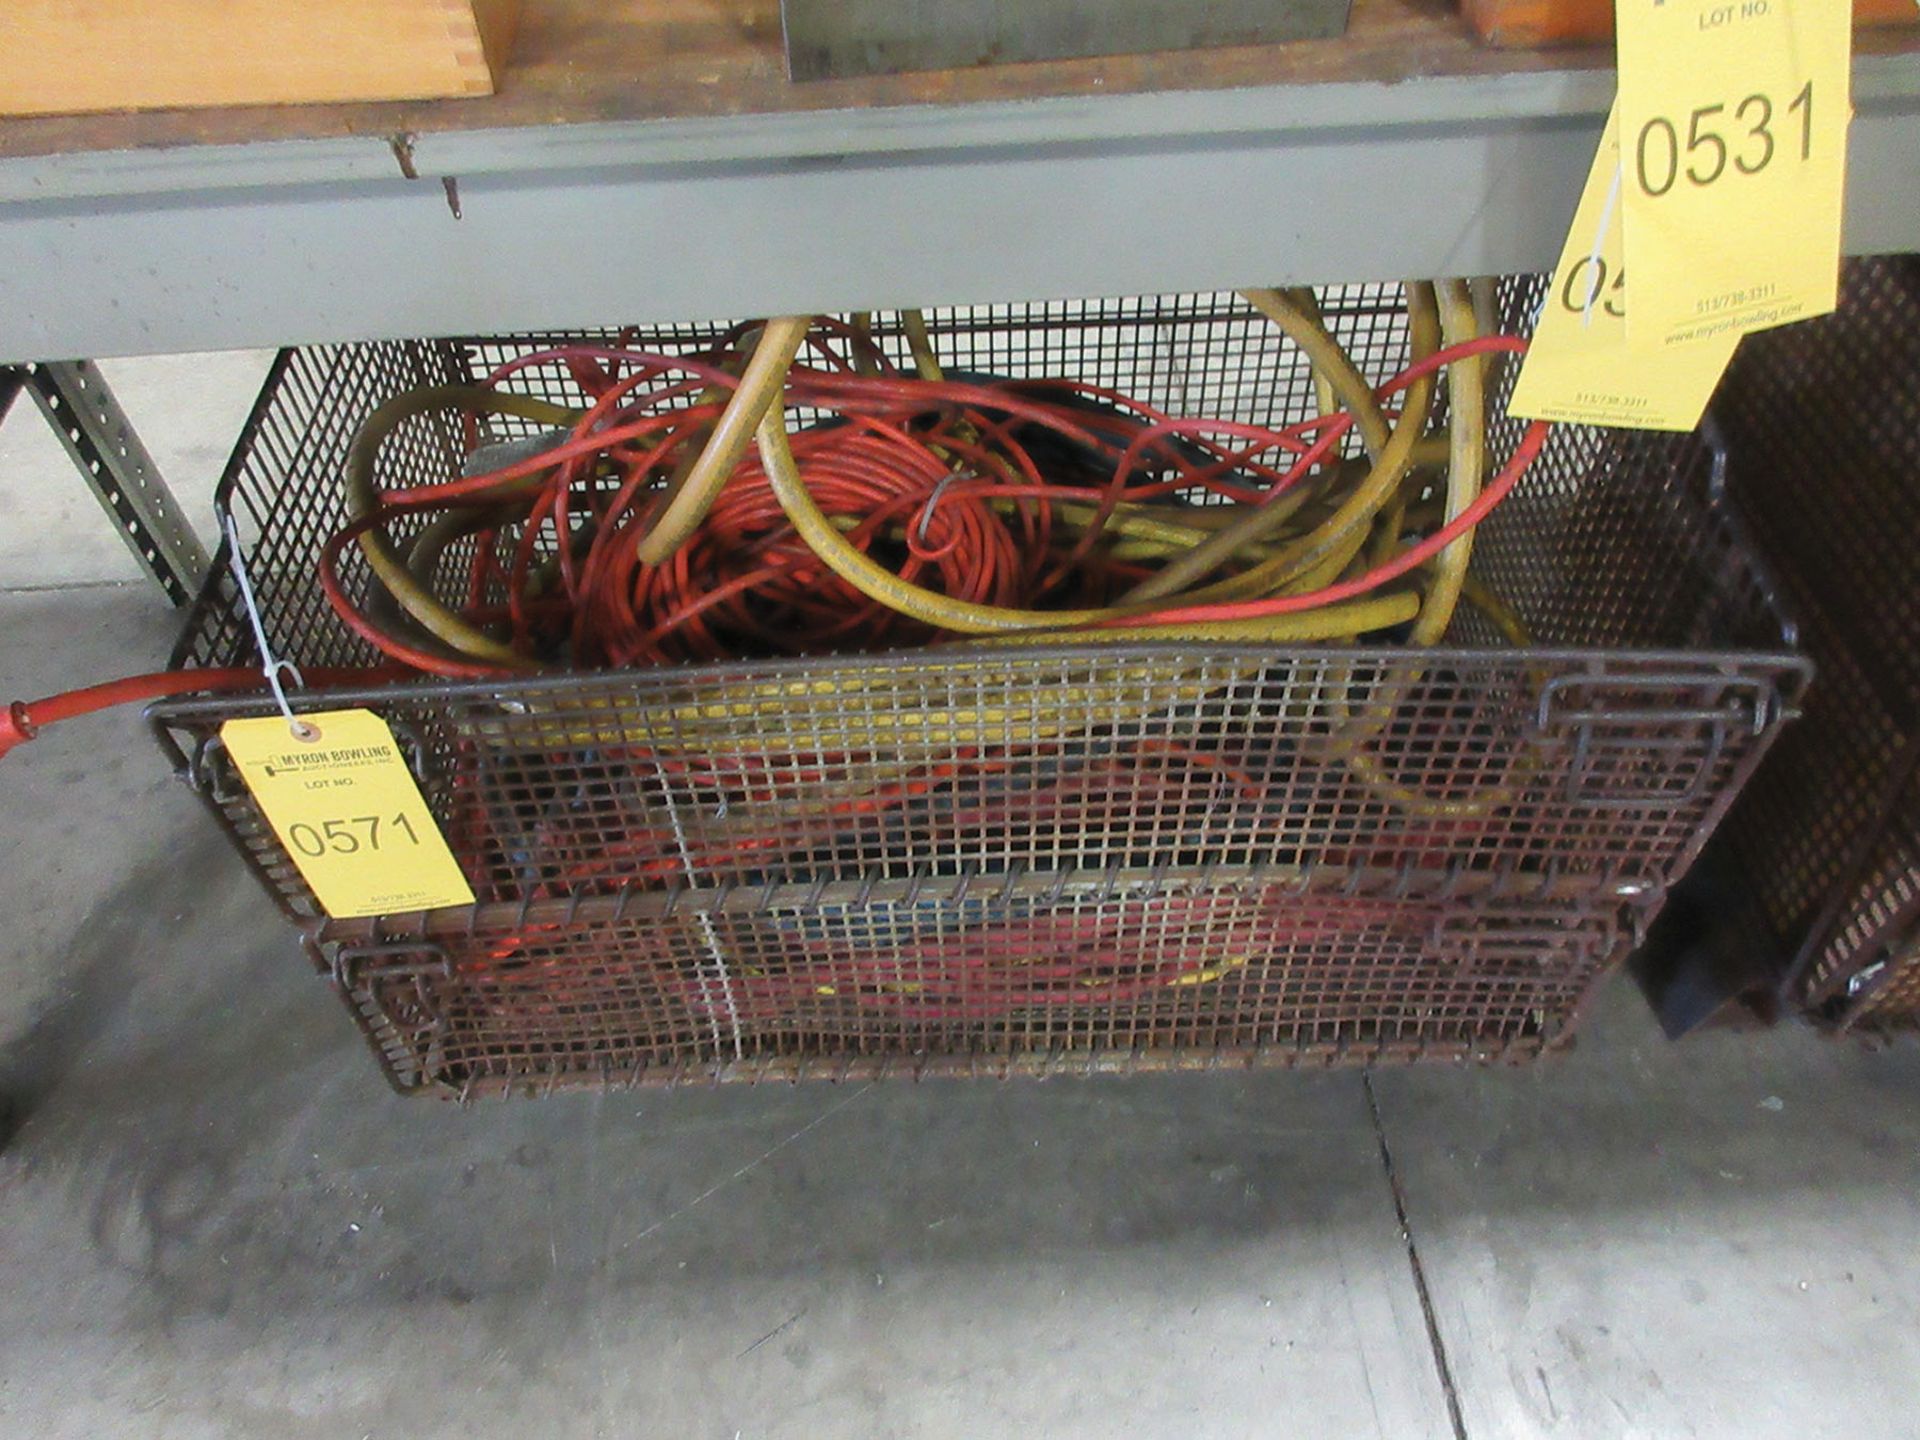 WIRE BASKET WITH EXTENSION CORDS & AIR HOSE